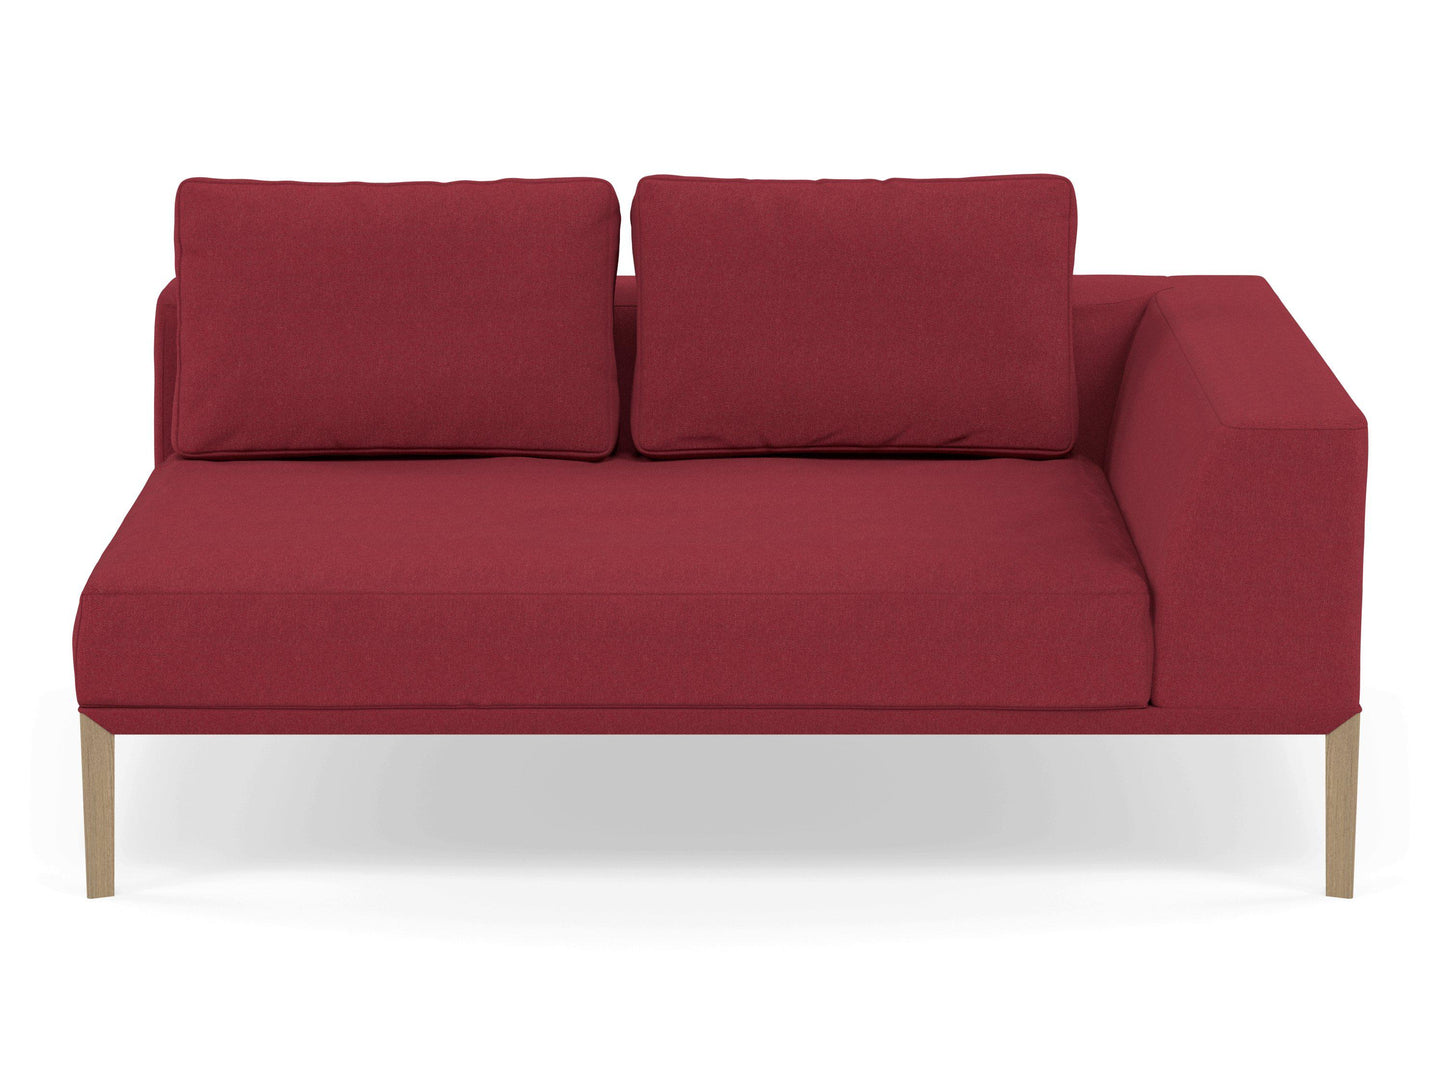 Modern 2 Seater Chaise Lounge Style Sofa with Left Armrest in Rasberry Red Fabric-Natural Oak-Distinct Designs (London) Ltd